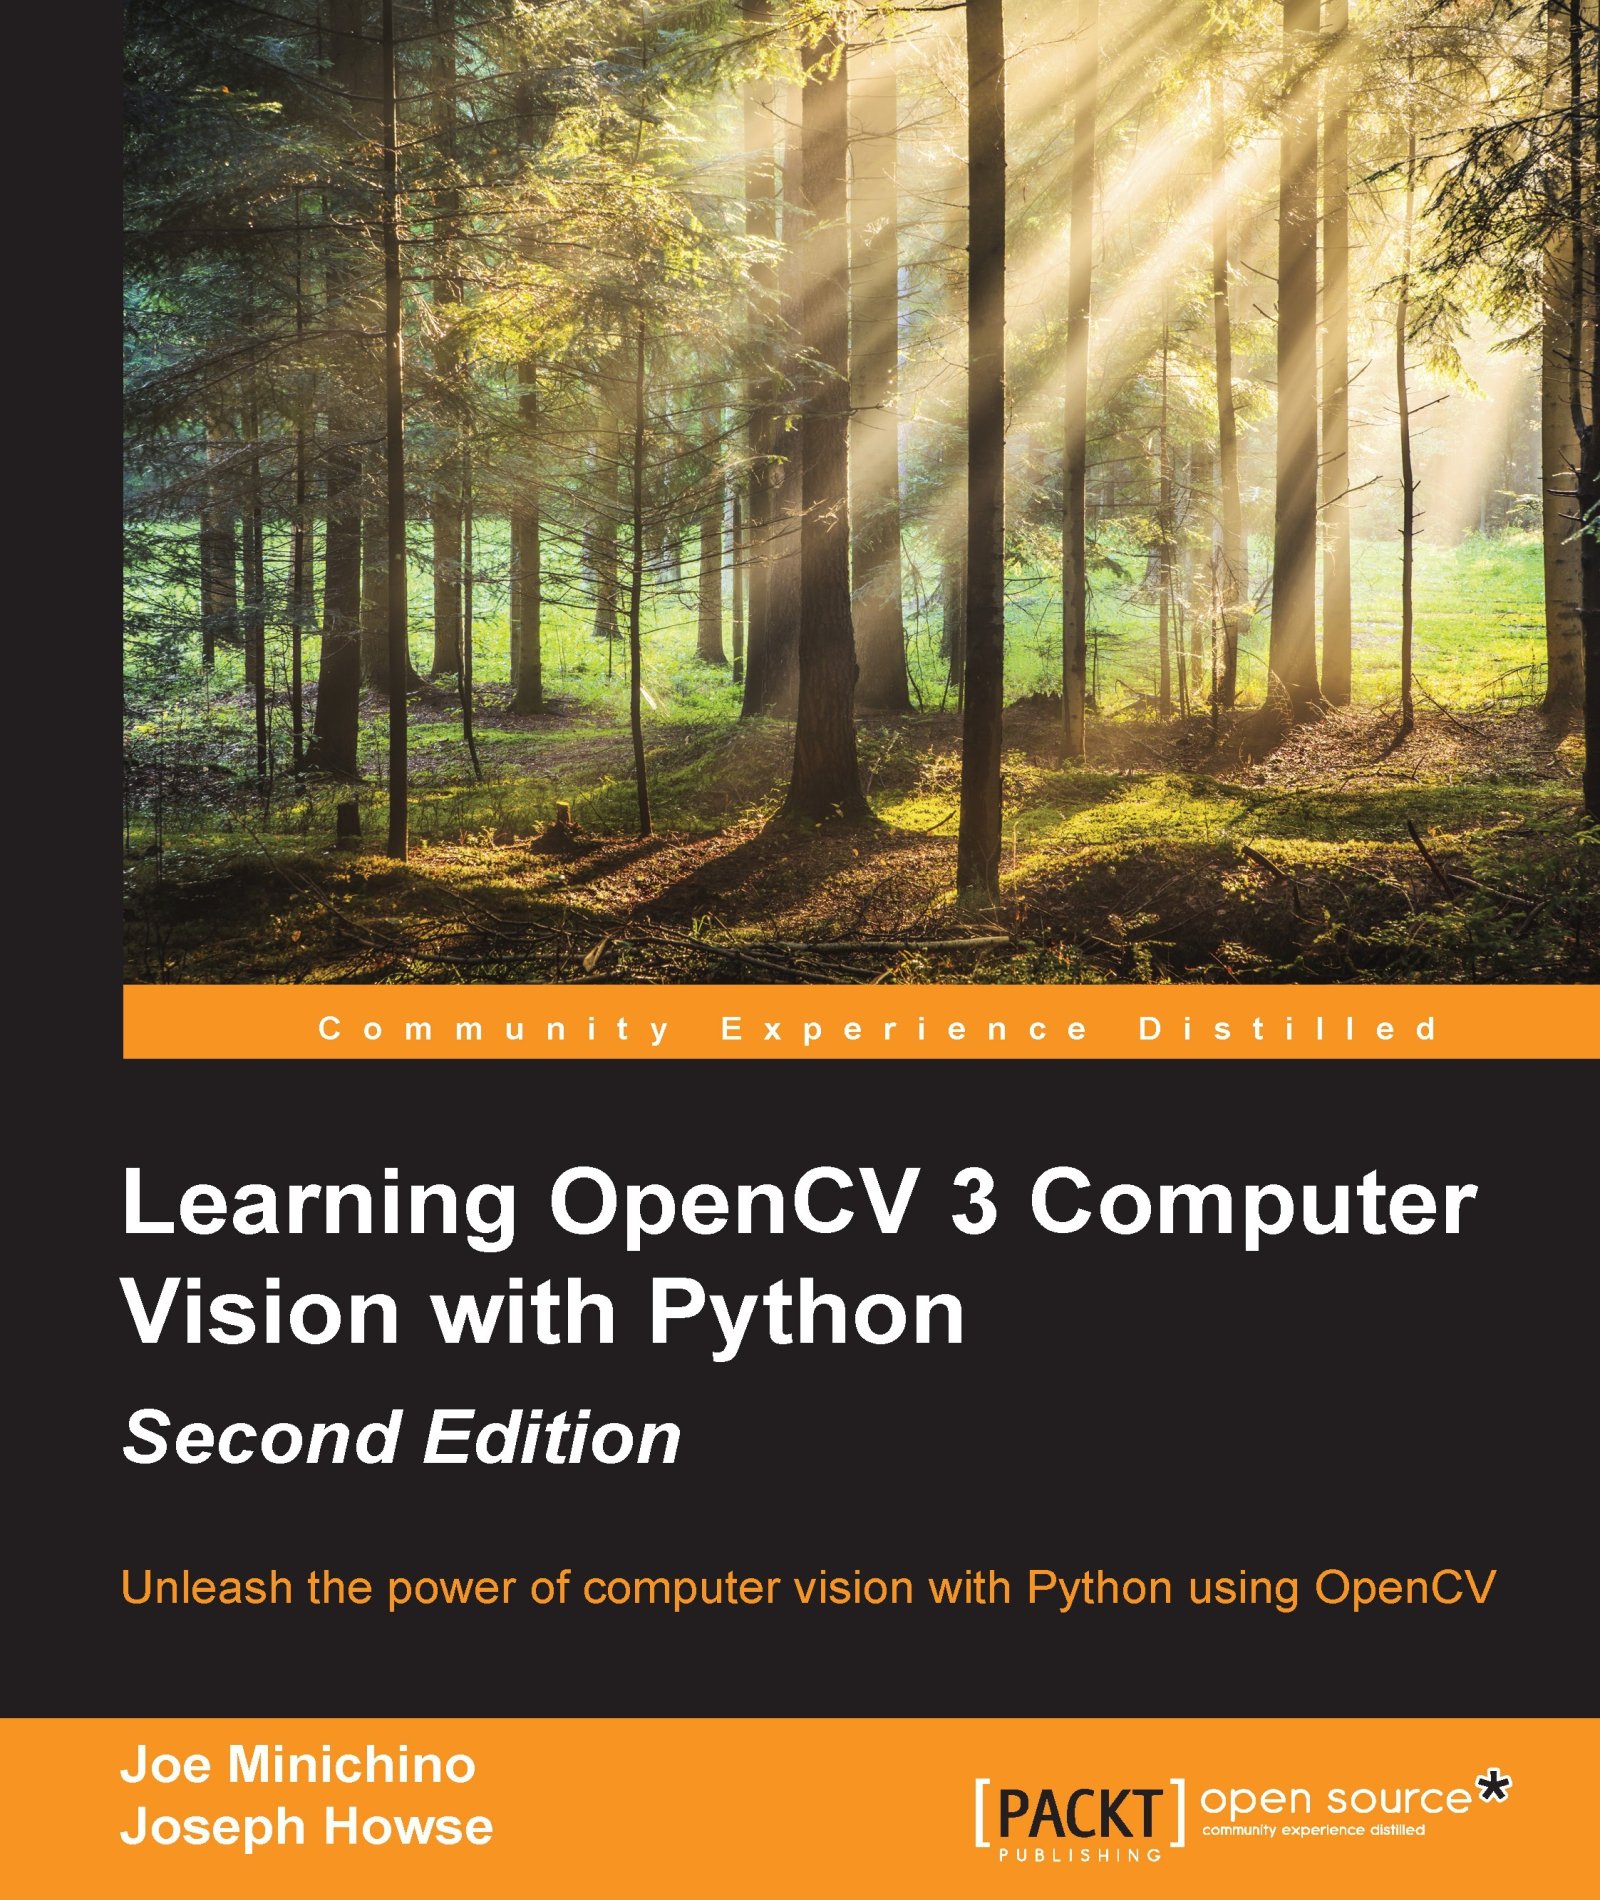 Learning OpenCV 3 Computer Vision with Python - Joe Minichino, Joseph Howse